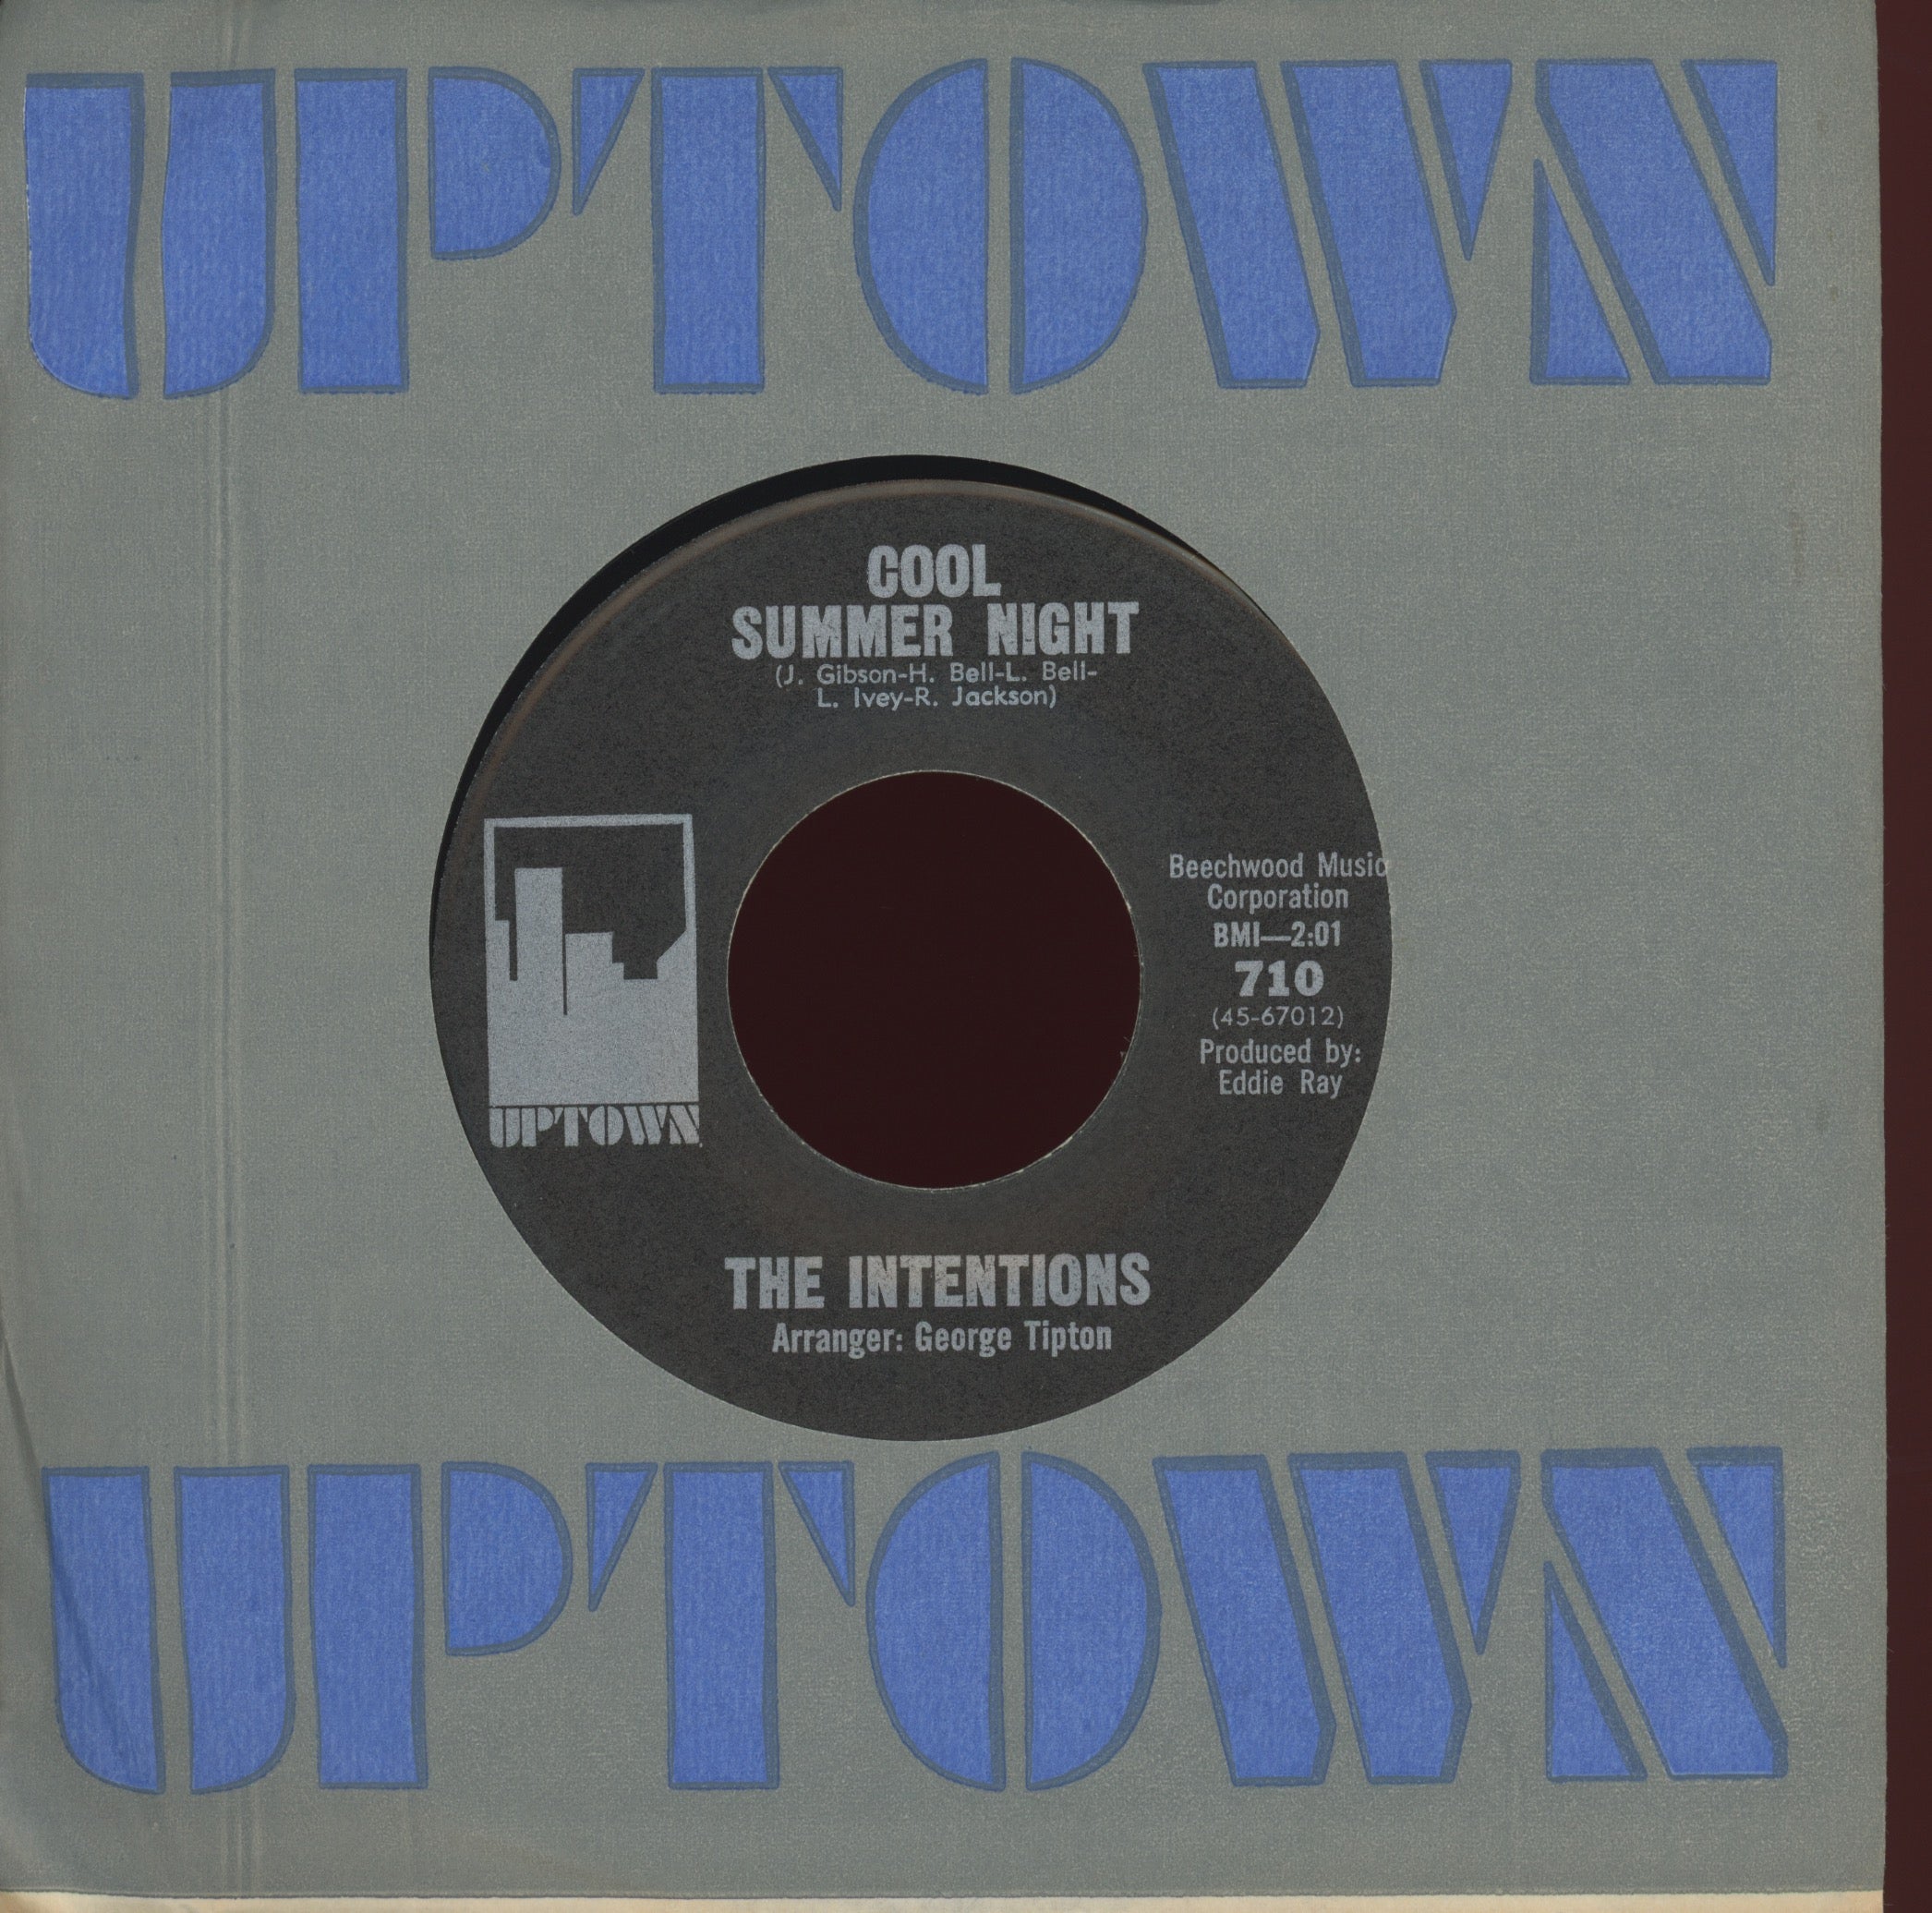 The Intentions - Time on Uptown